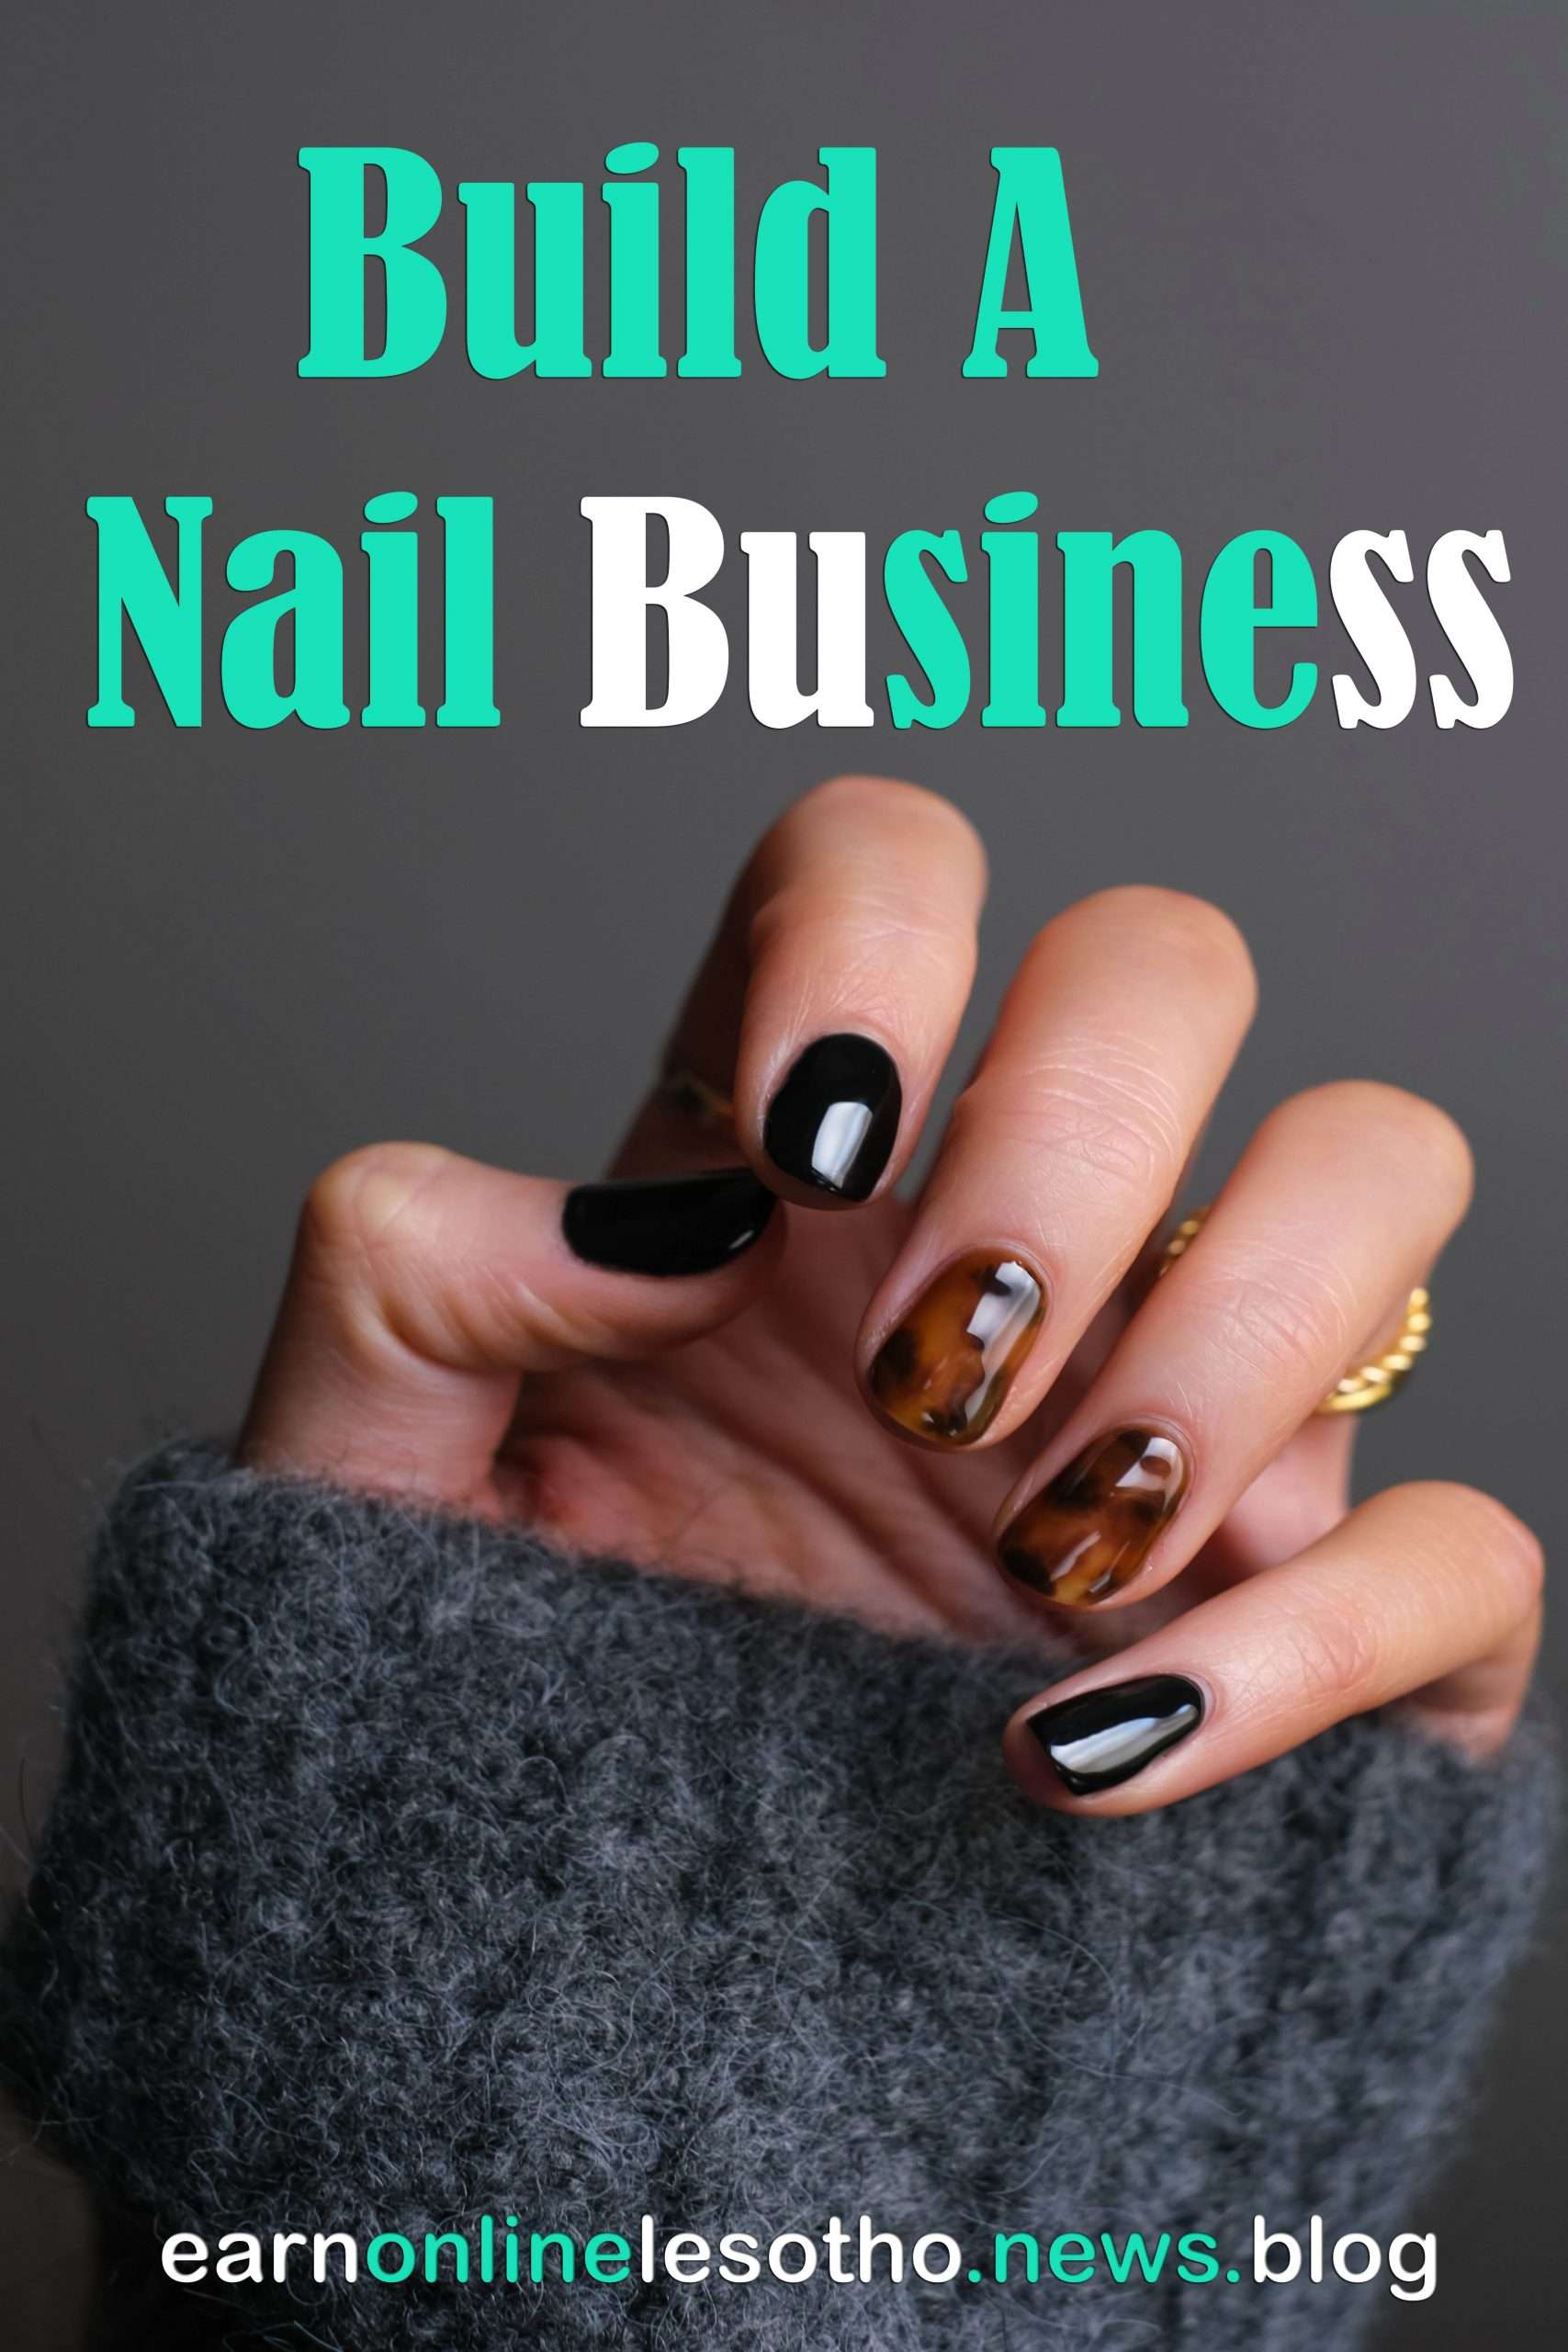 How to start a nail business from home in 2021